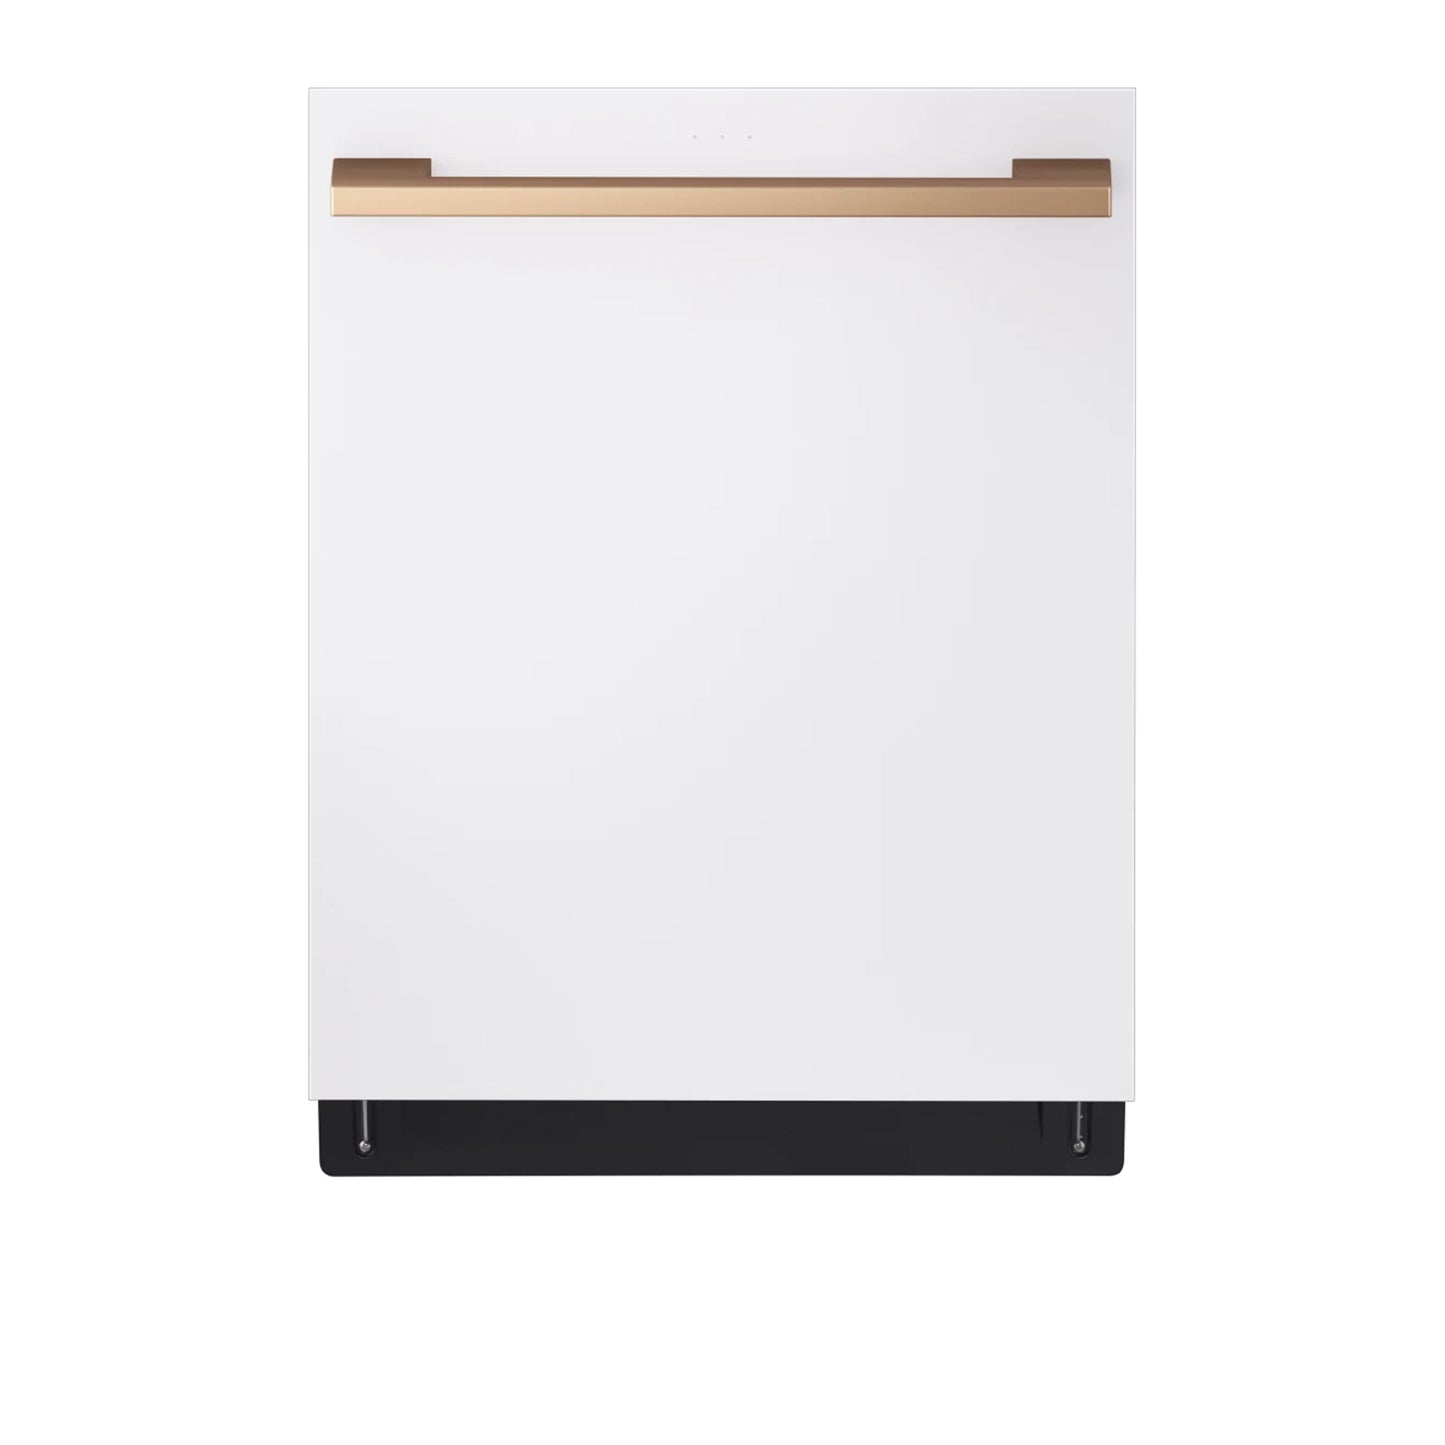 LG STUDIO Smart Top Control Dishwasher with 1-Hour Wash & Dry, QuadWash Pro, TrueSteam and Dynamic Heat Dry